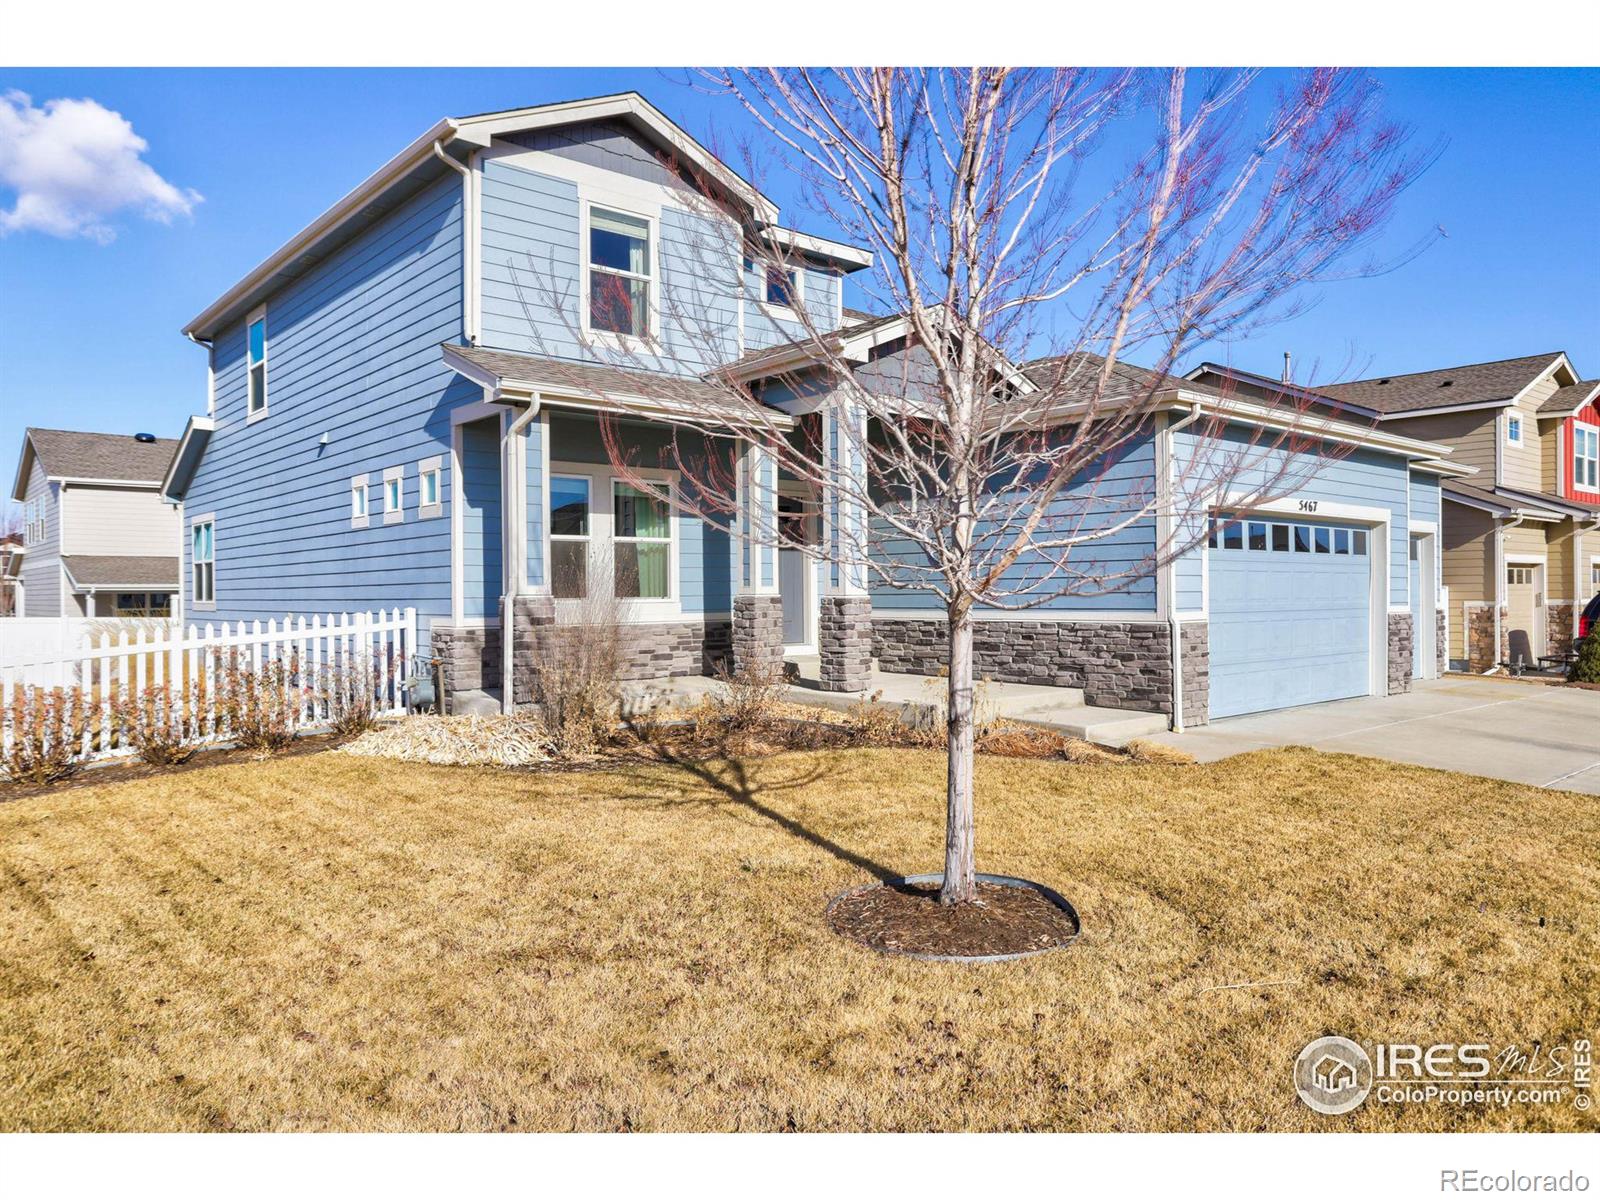 Report Image for 5467  Sequoia Place,Frederick, Colorado